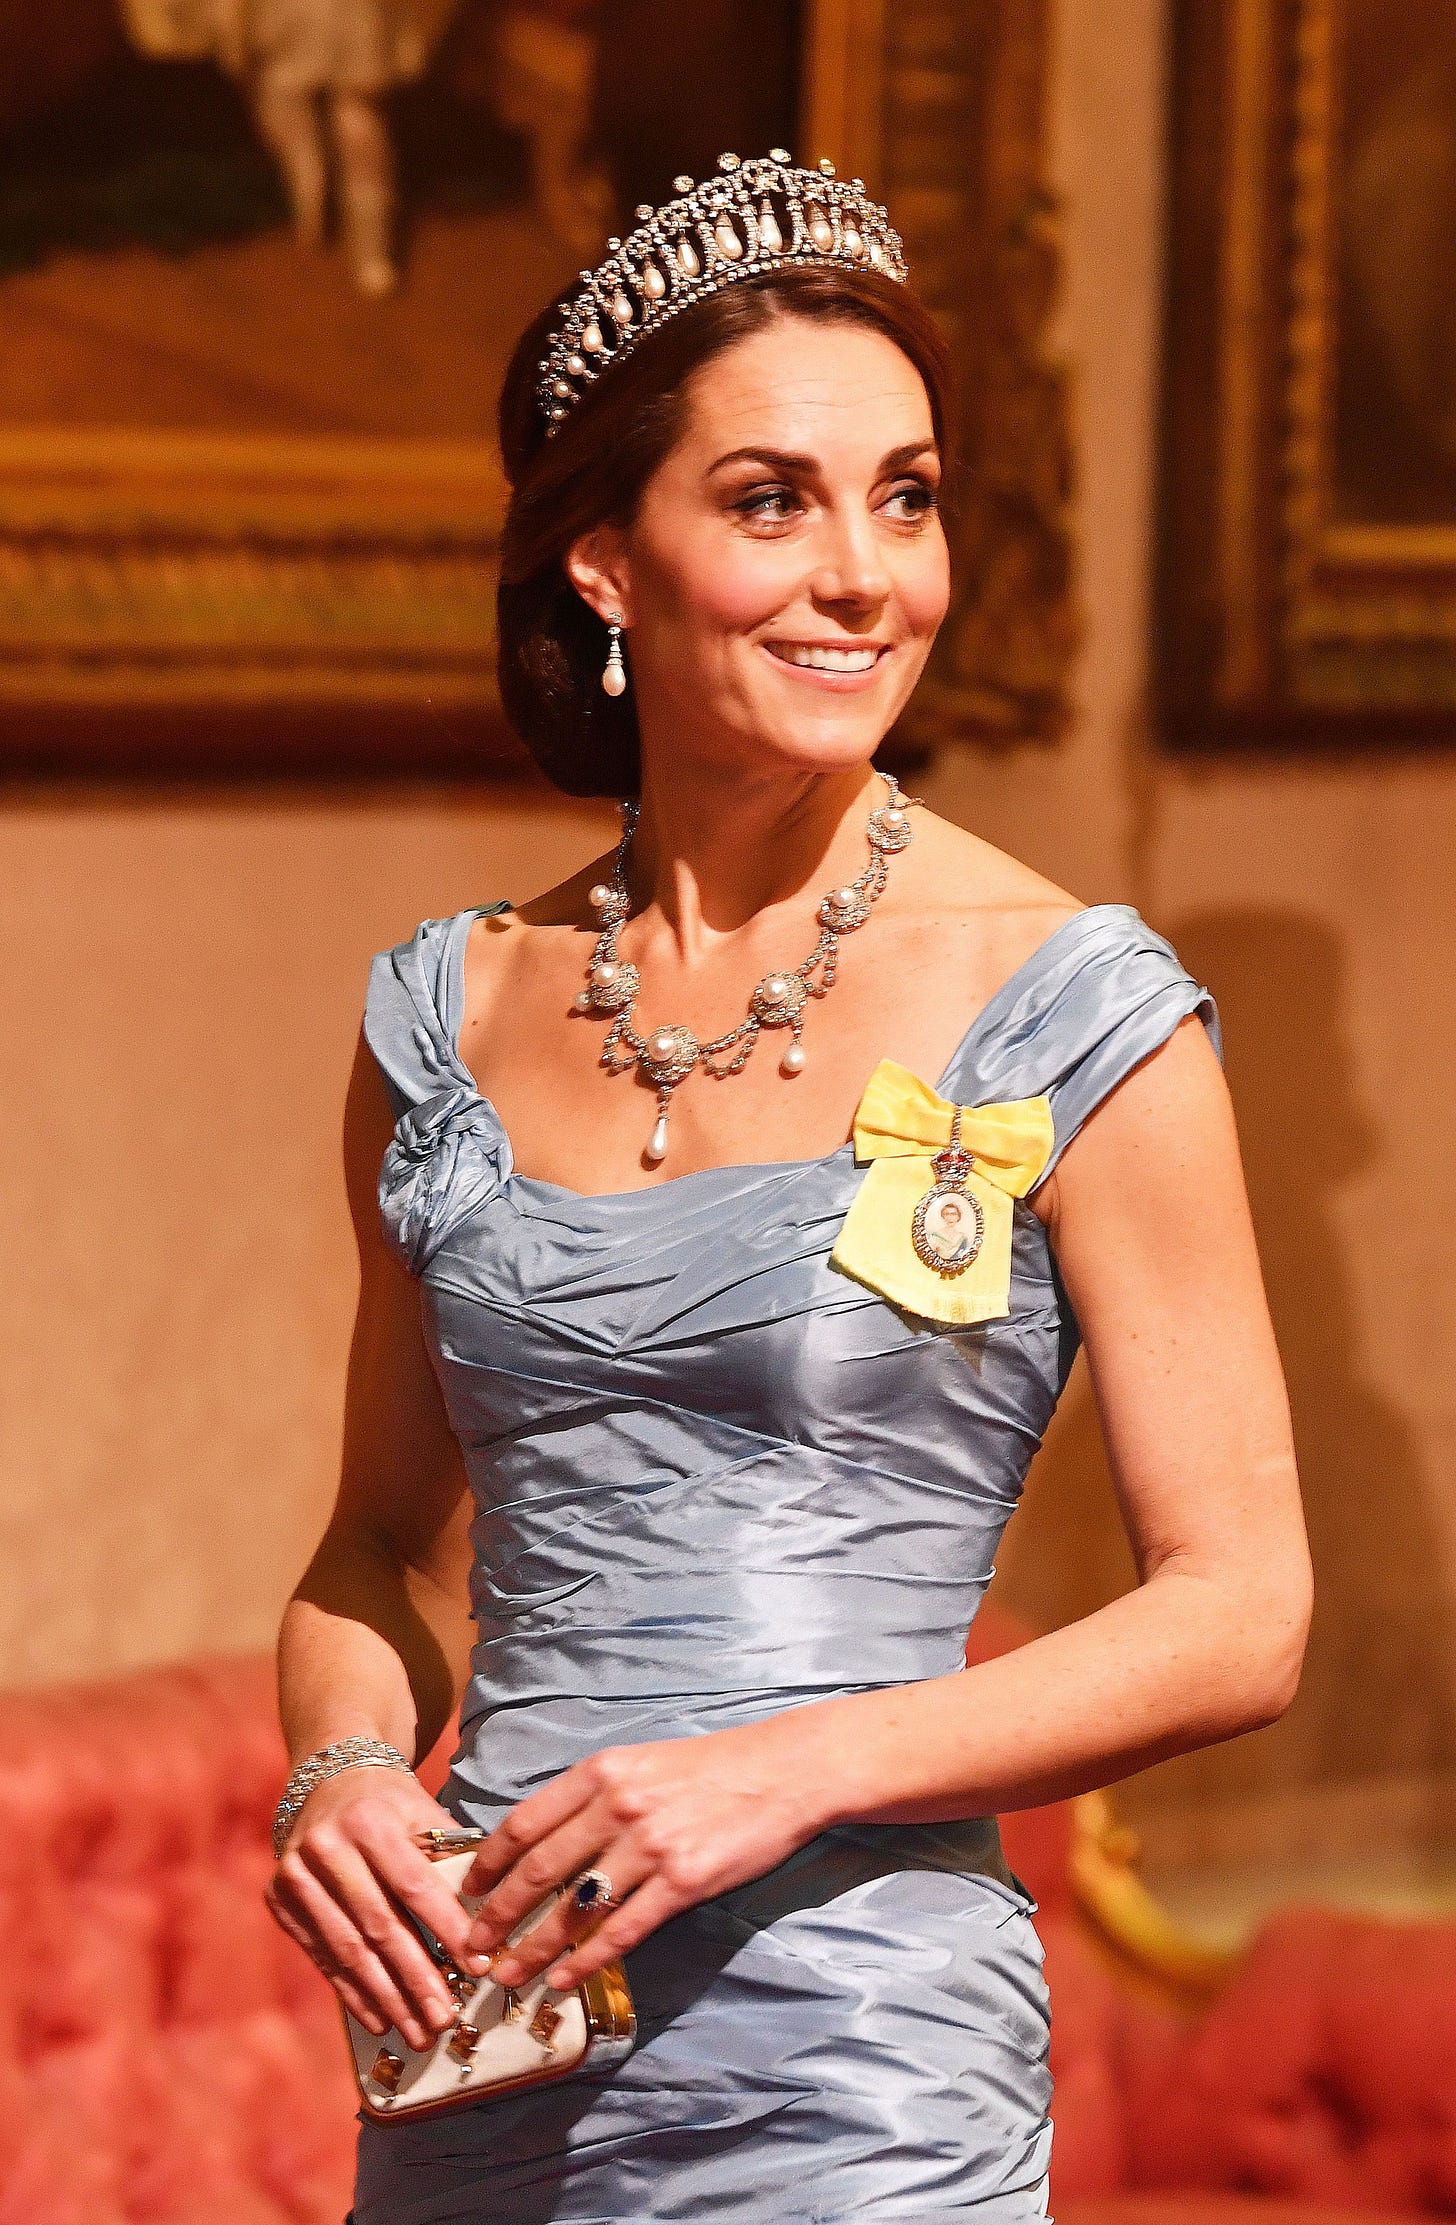 The First Photos of Kate Middleton Wearing a Royal Order Are Breathtaking